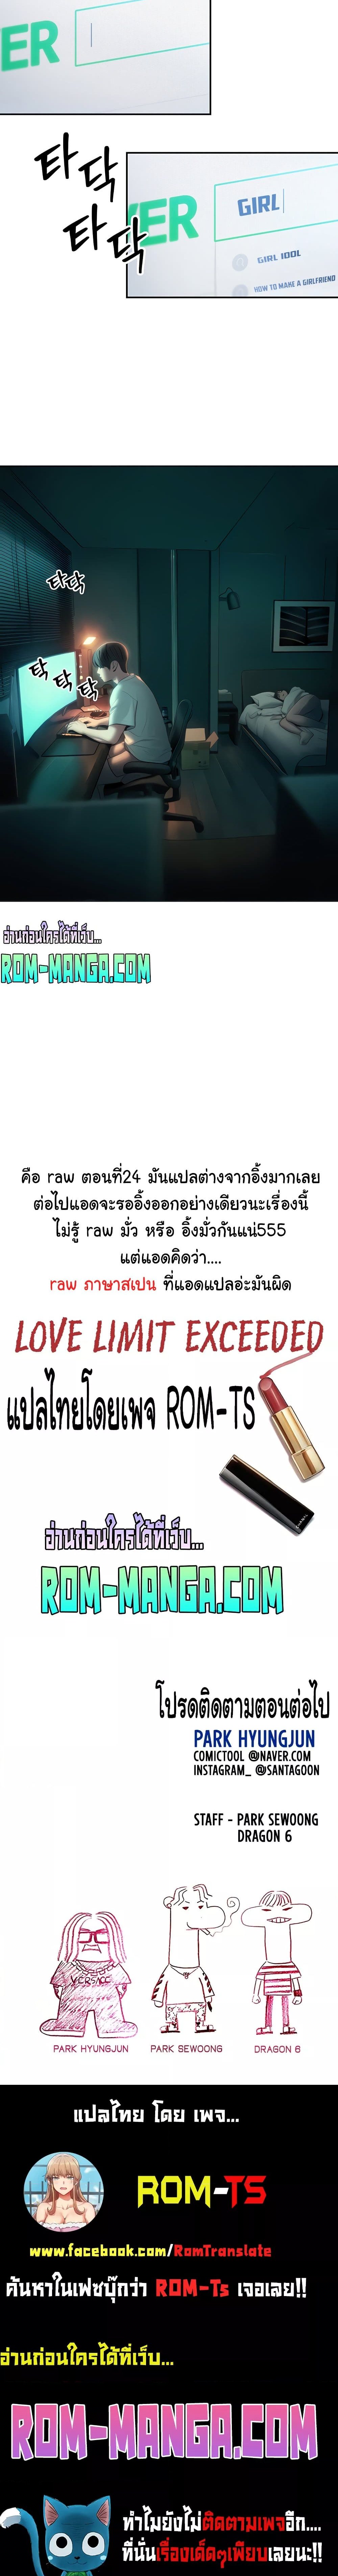 Love Limit Exceeded7